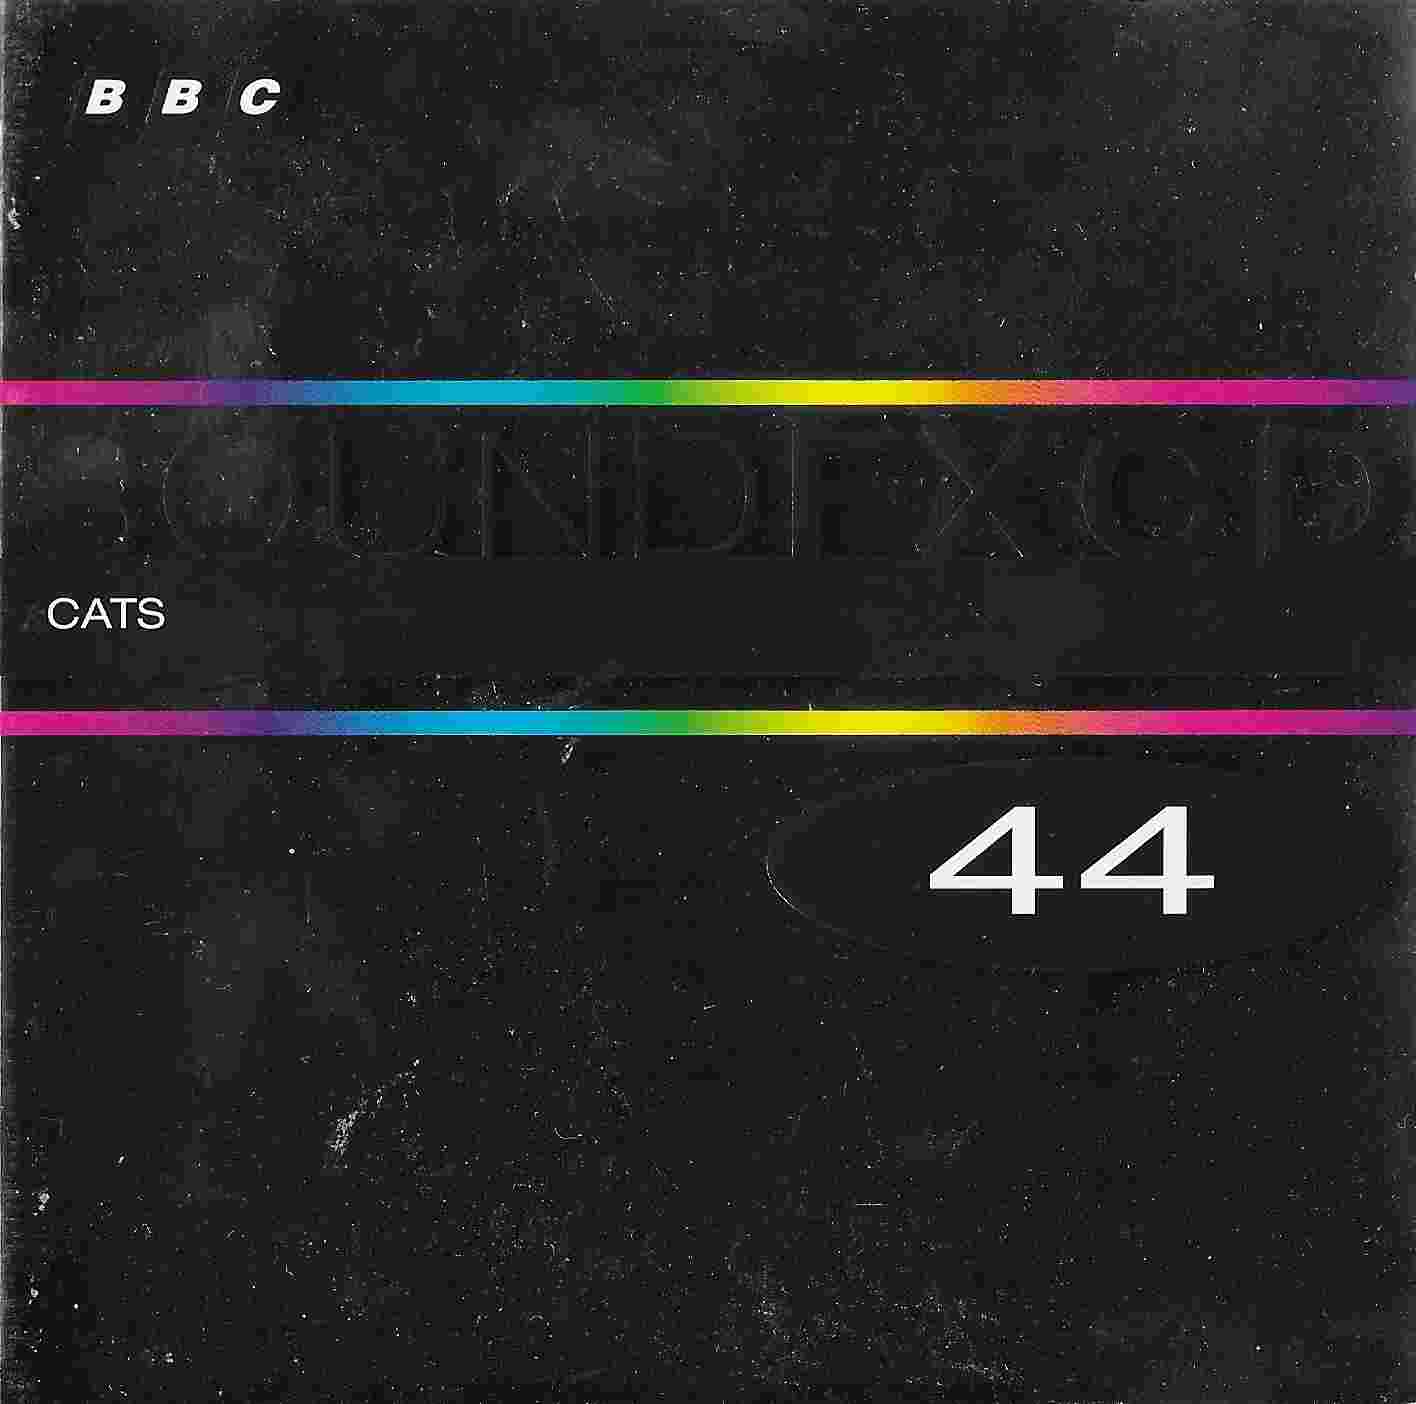 Picture of BBCCD SFX044 Cats by artist Various from the BBC cds - Records and Tapes library